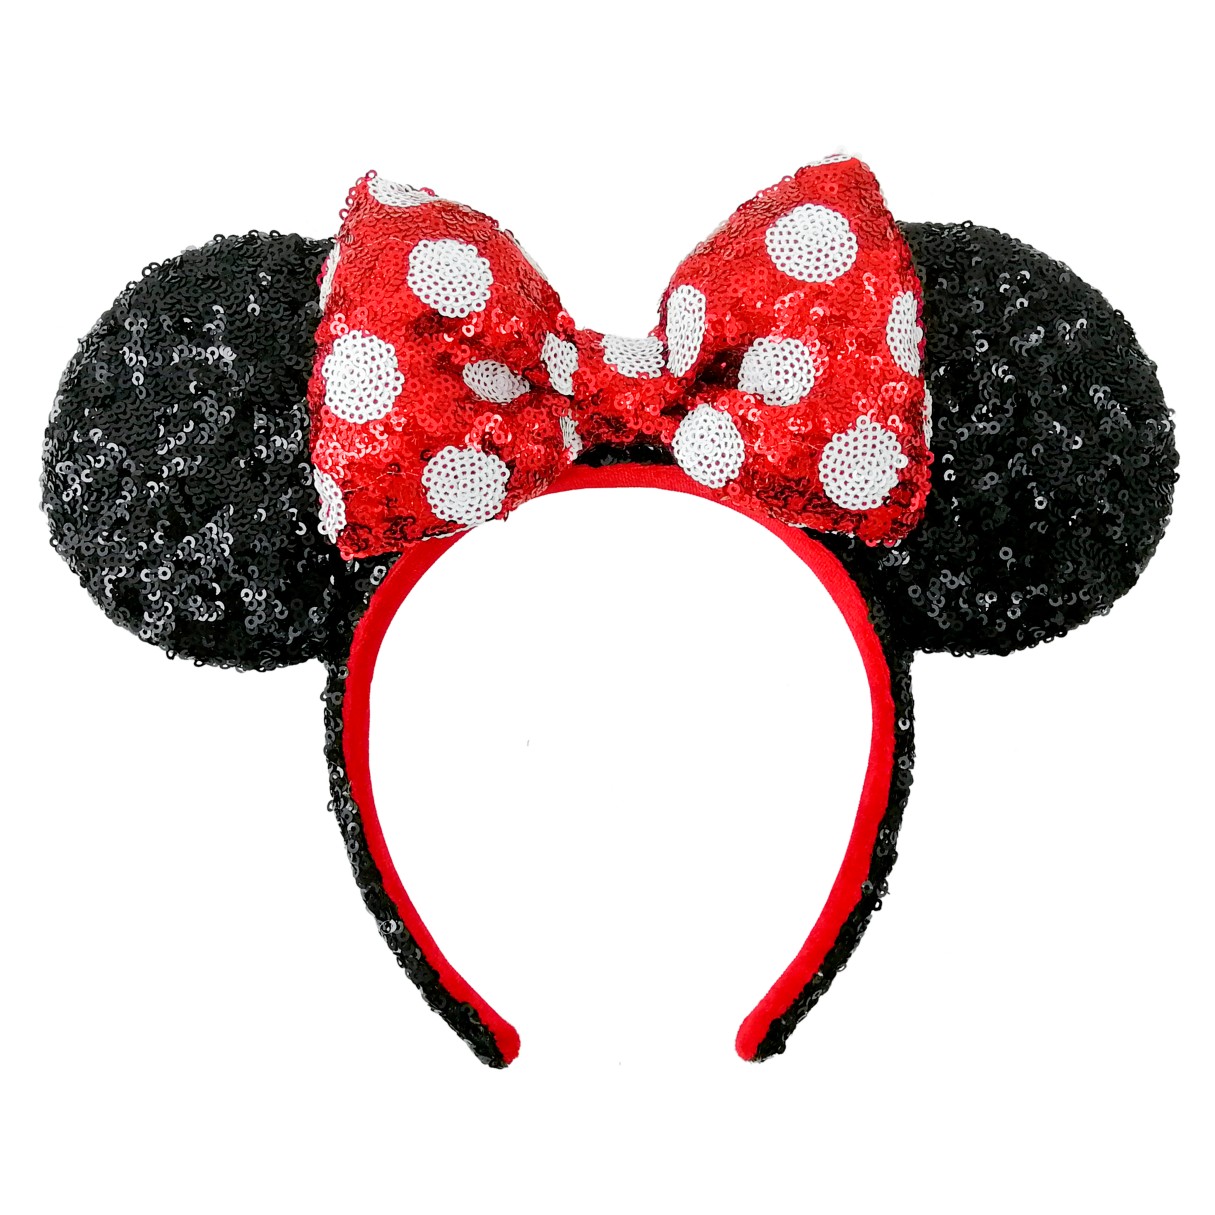 Minnie Mouse Sequined Ear Headband – Red & White Polka Dot